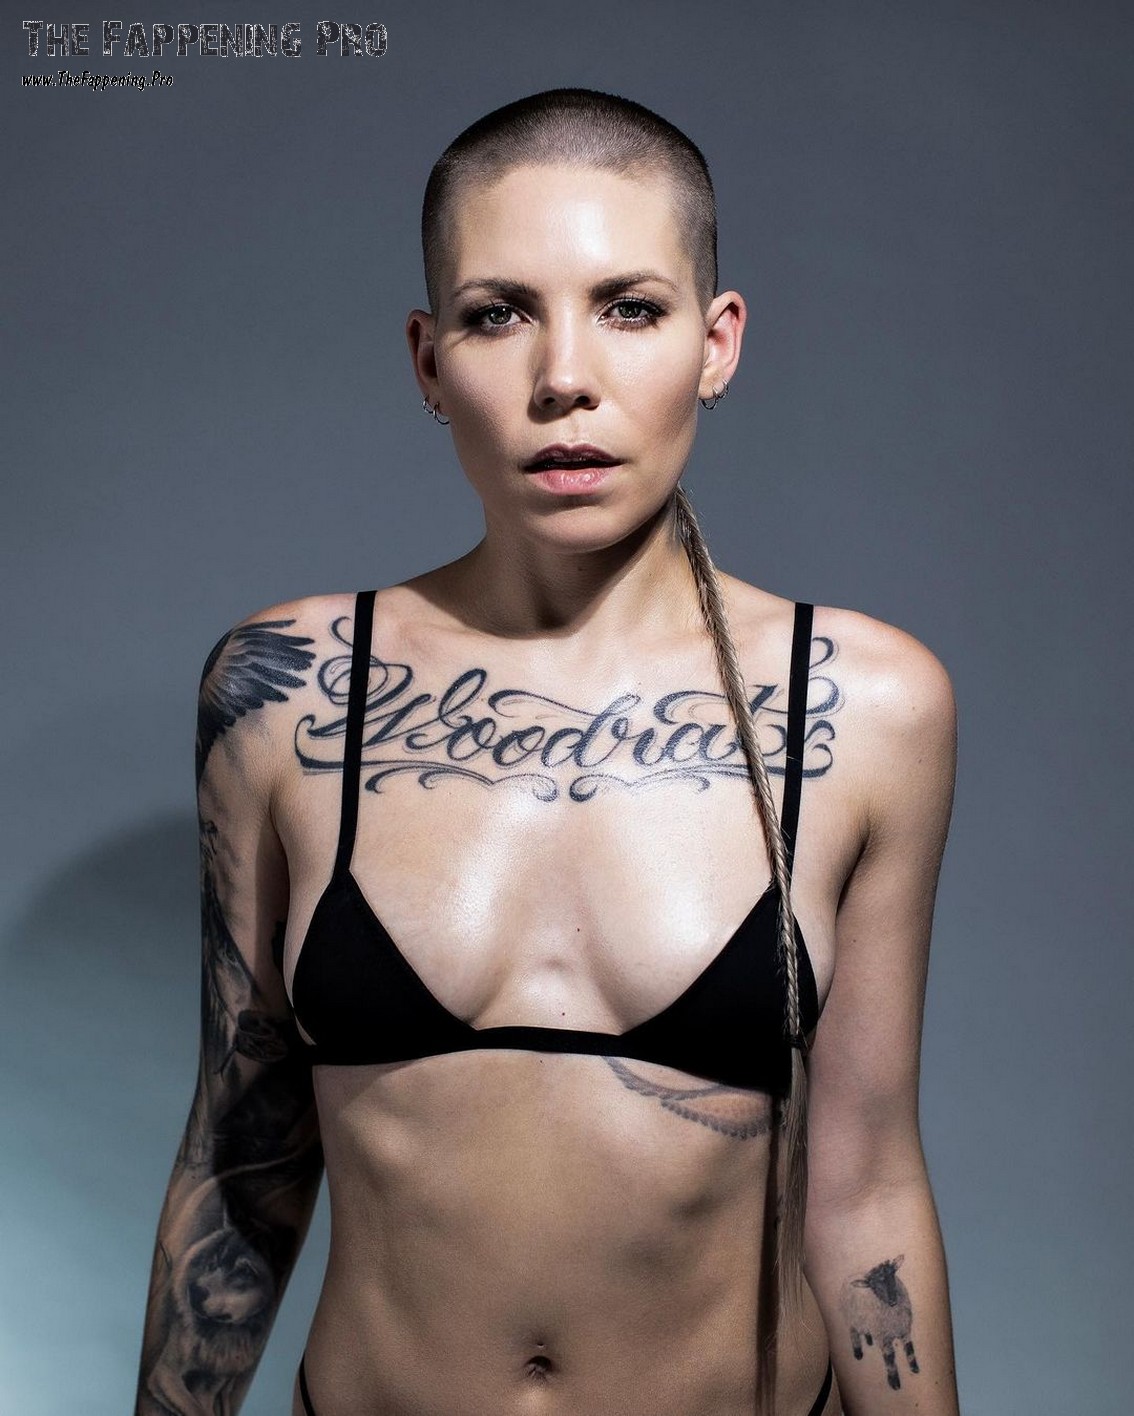 Get ready for a wild ride with American singer Skylar Grey as she continues to push the boundaries of her image. Sporting a unique hairstyle with a short-shaven head and a ponytail, along with a plethora of tattoos, she's redefining what it means to be sexy. In daring photos for multiple magazines, including Numero, Skylar Grey bares it all, flaunting her tattoos, backside, and toes, all while keeping her top covered. Don't miss out on this edgy and provocative transformation.